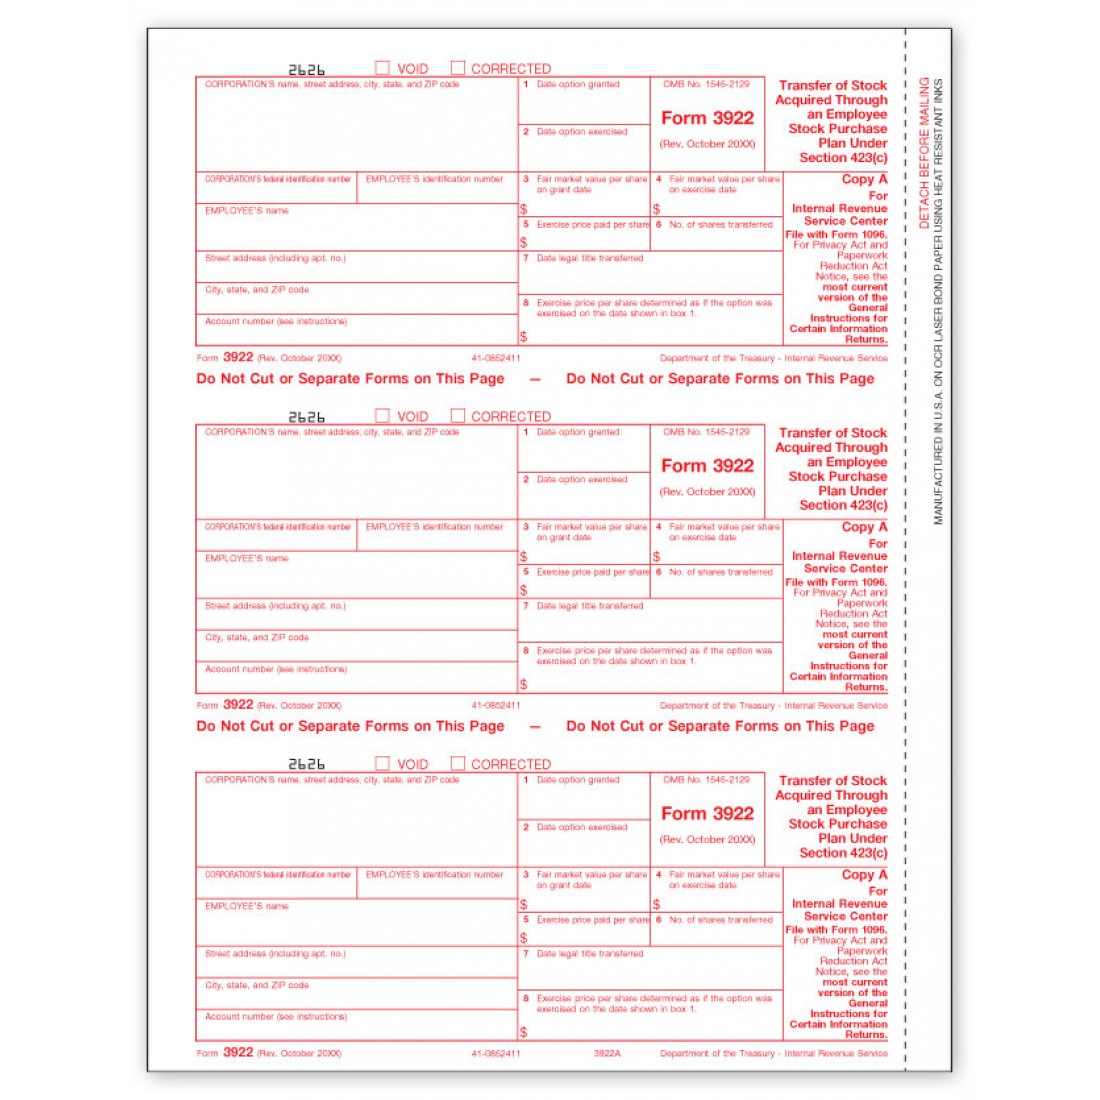 laser-tax-form-3922-copy-a-free-shipping